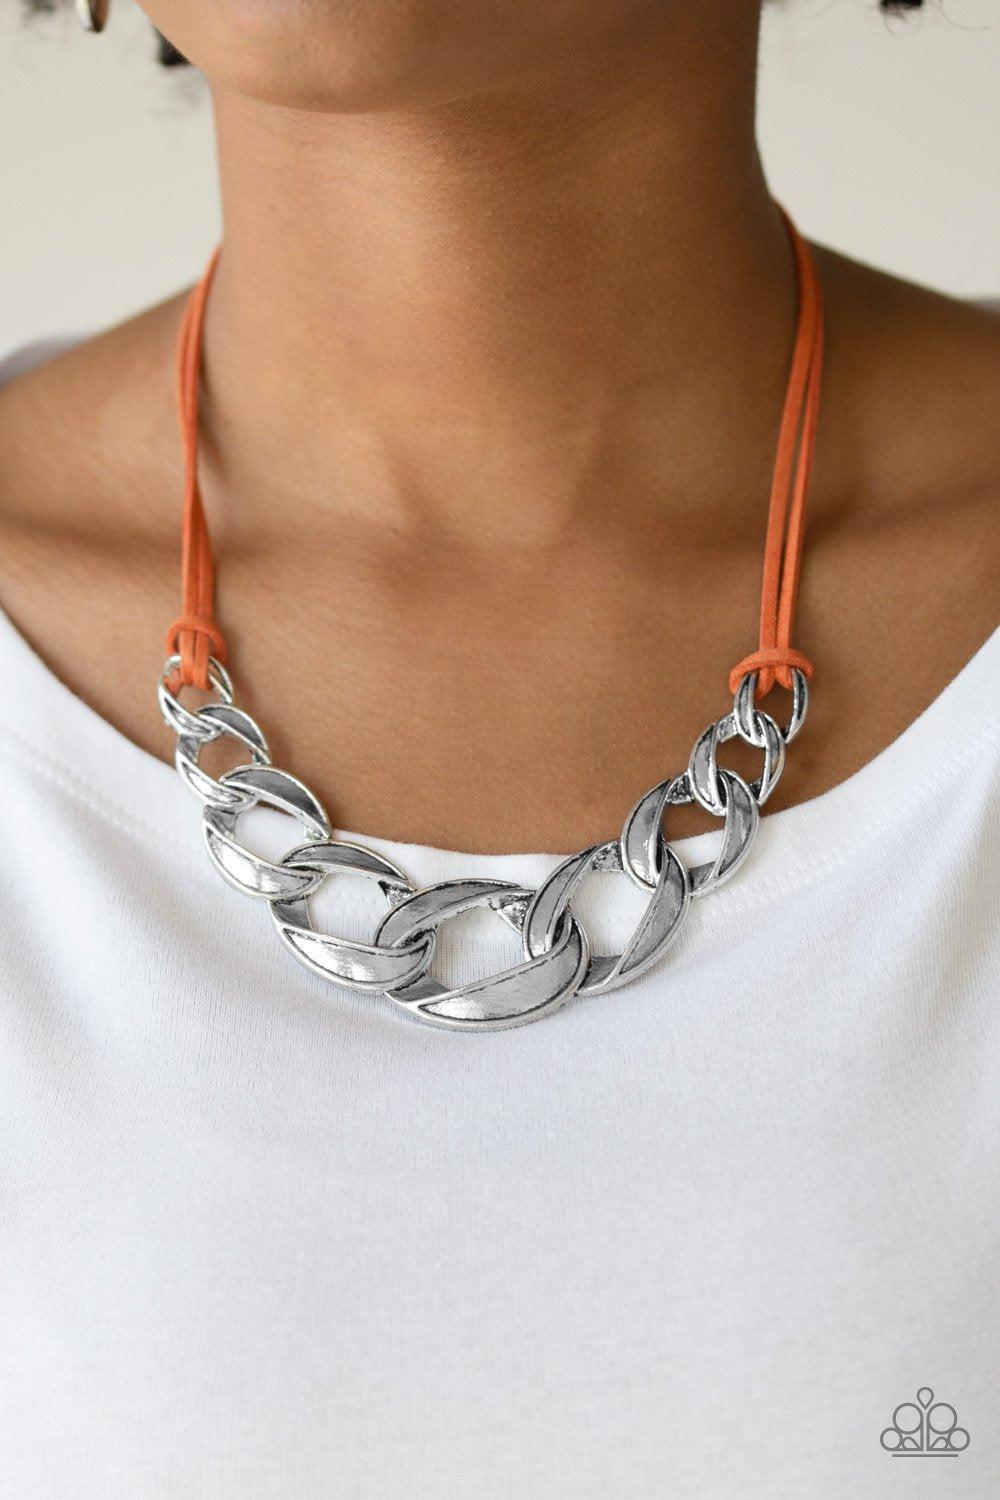 Naturally Nautical Orange Suede and Silver Chain Necklace - Paparazzi Accessories-CarasShop.com - $5 Jewelry by Cara Jewels